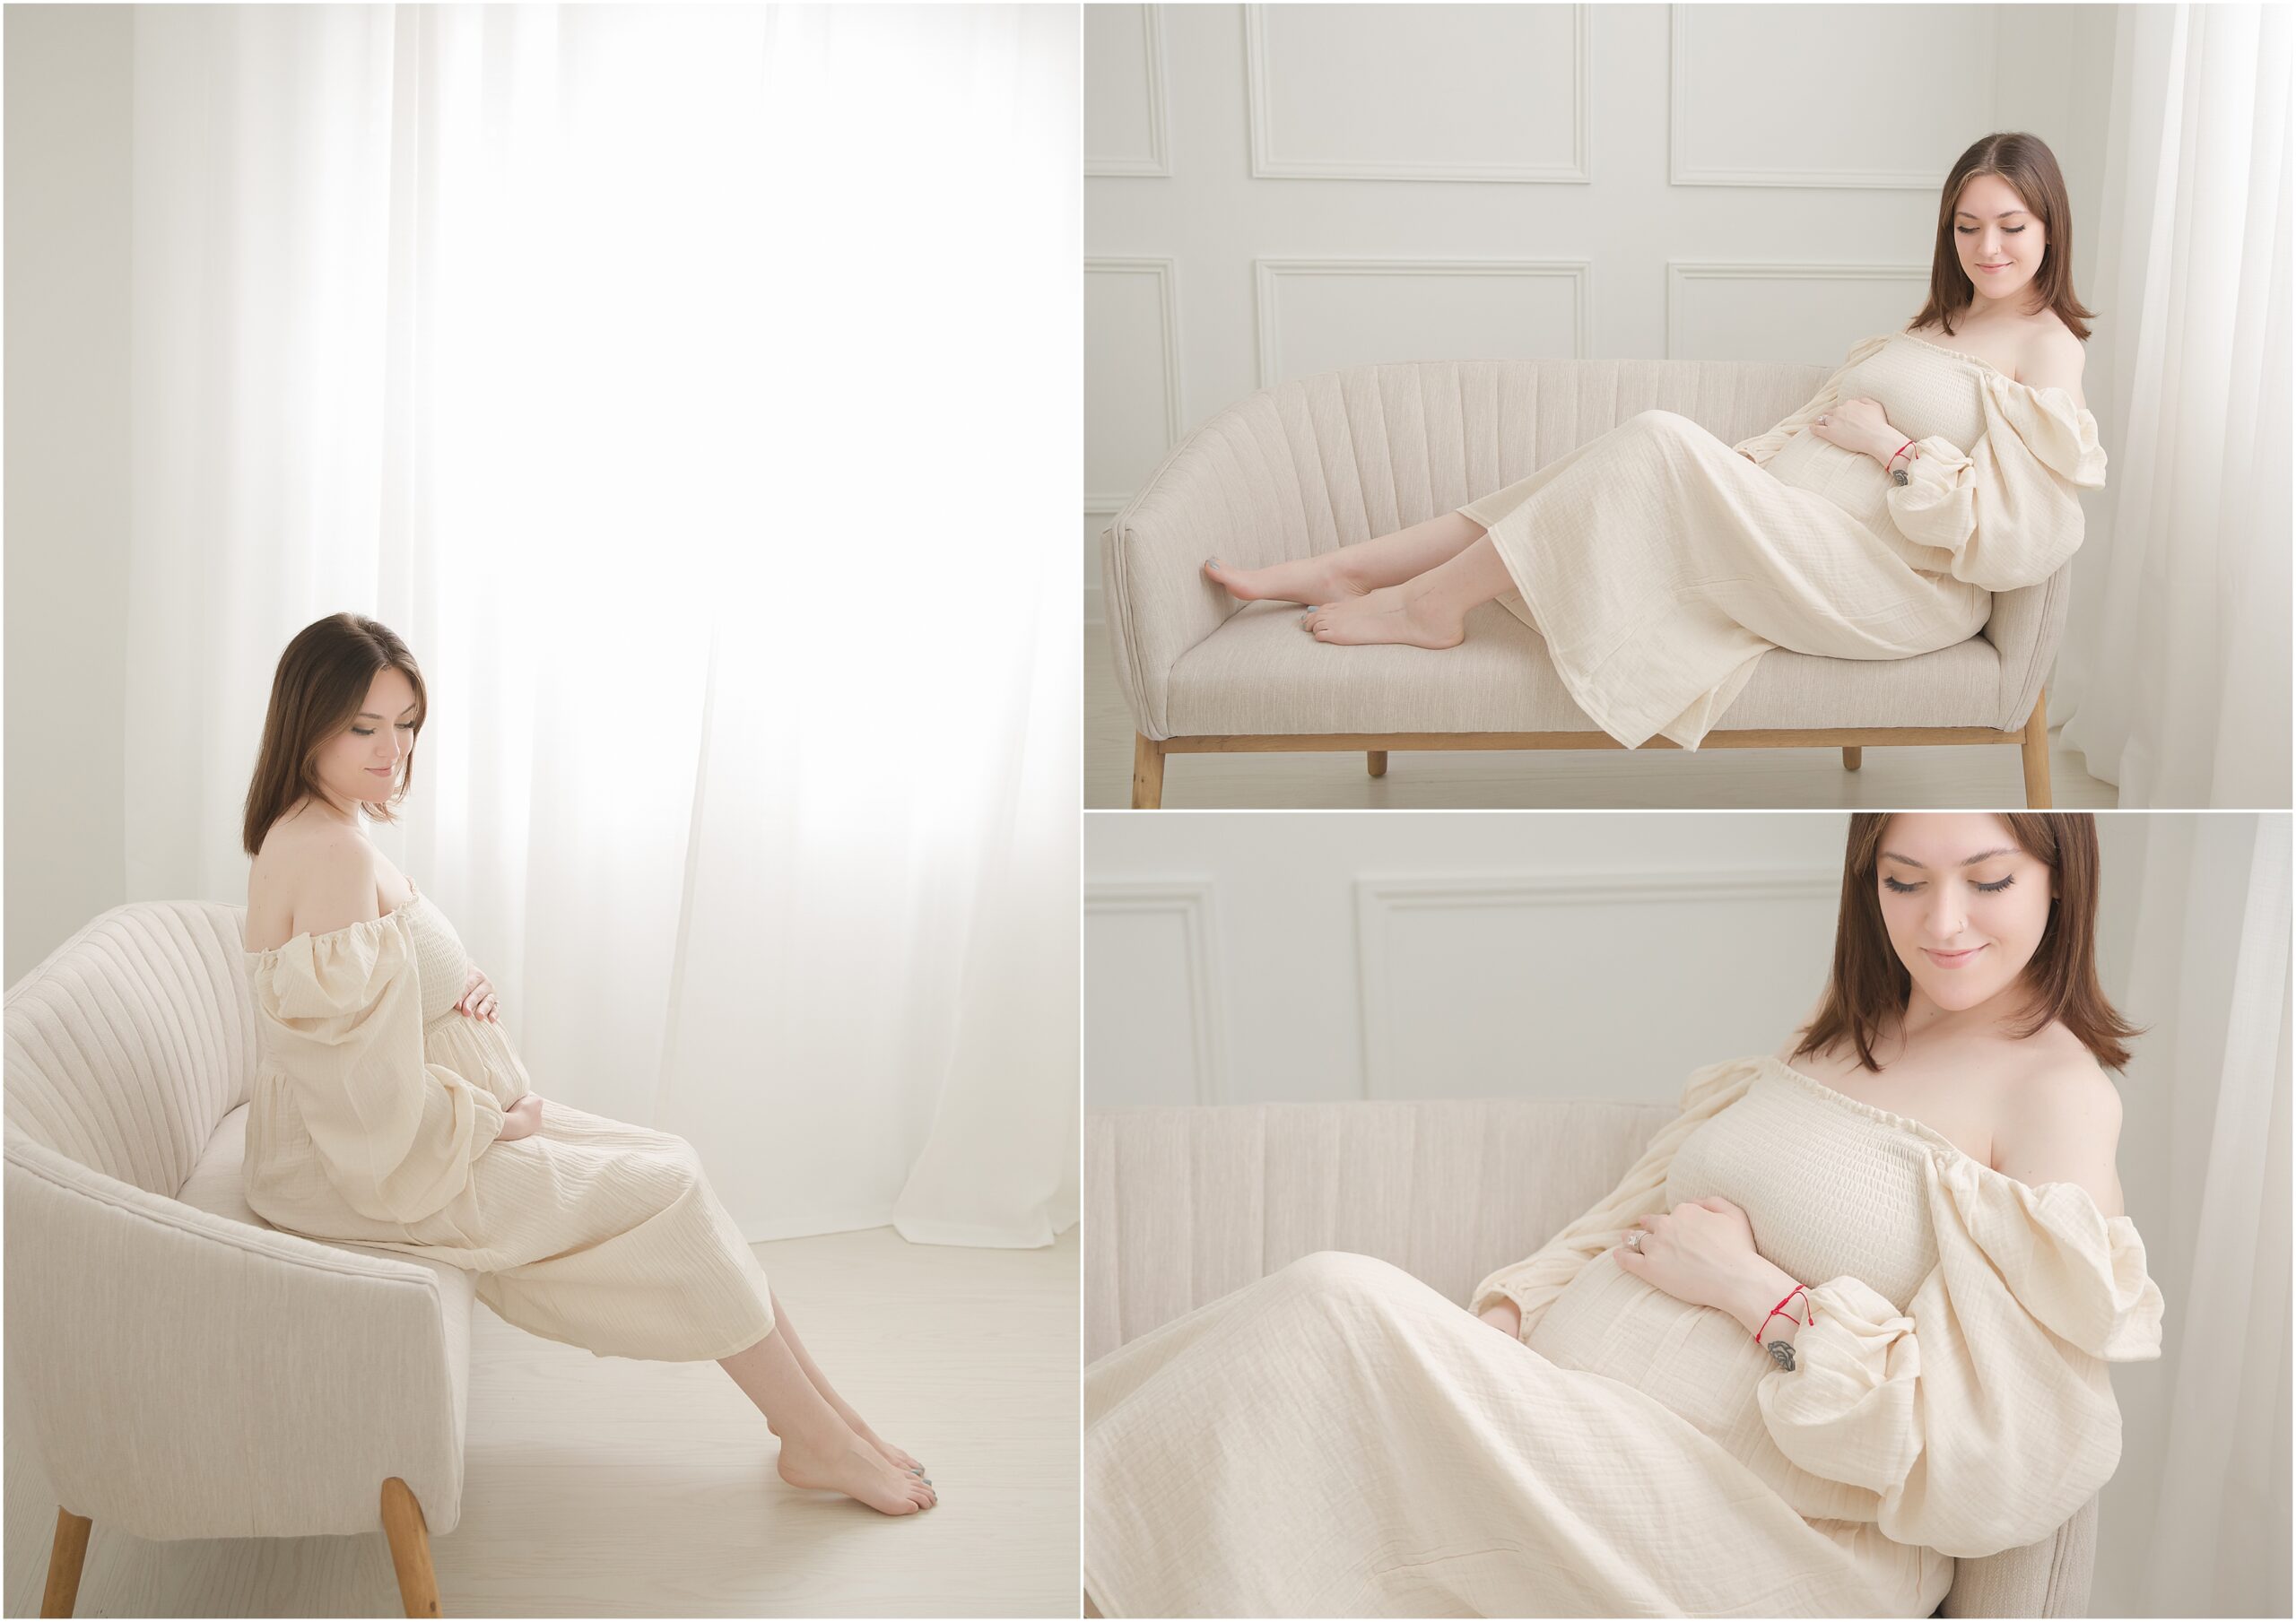 Woman poses on sofa in a cream dress for maternity photos